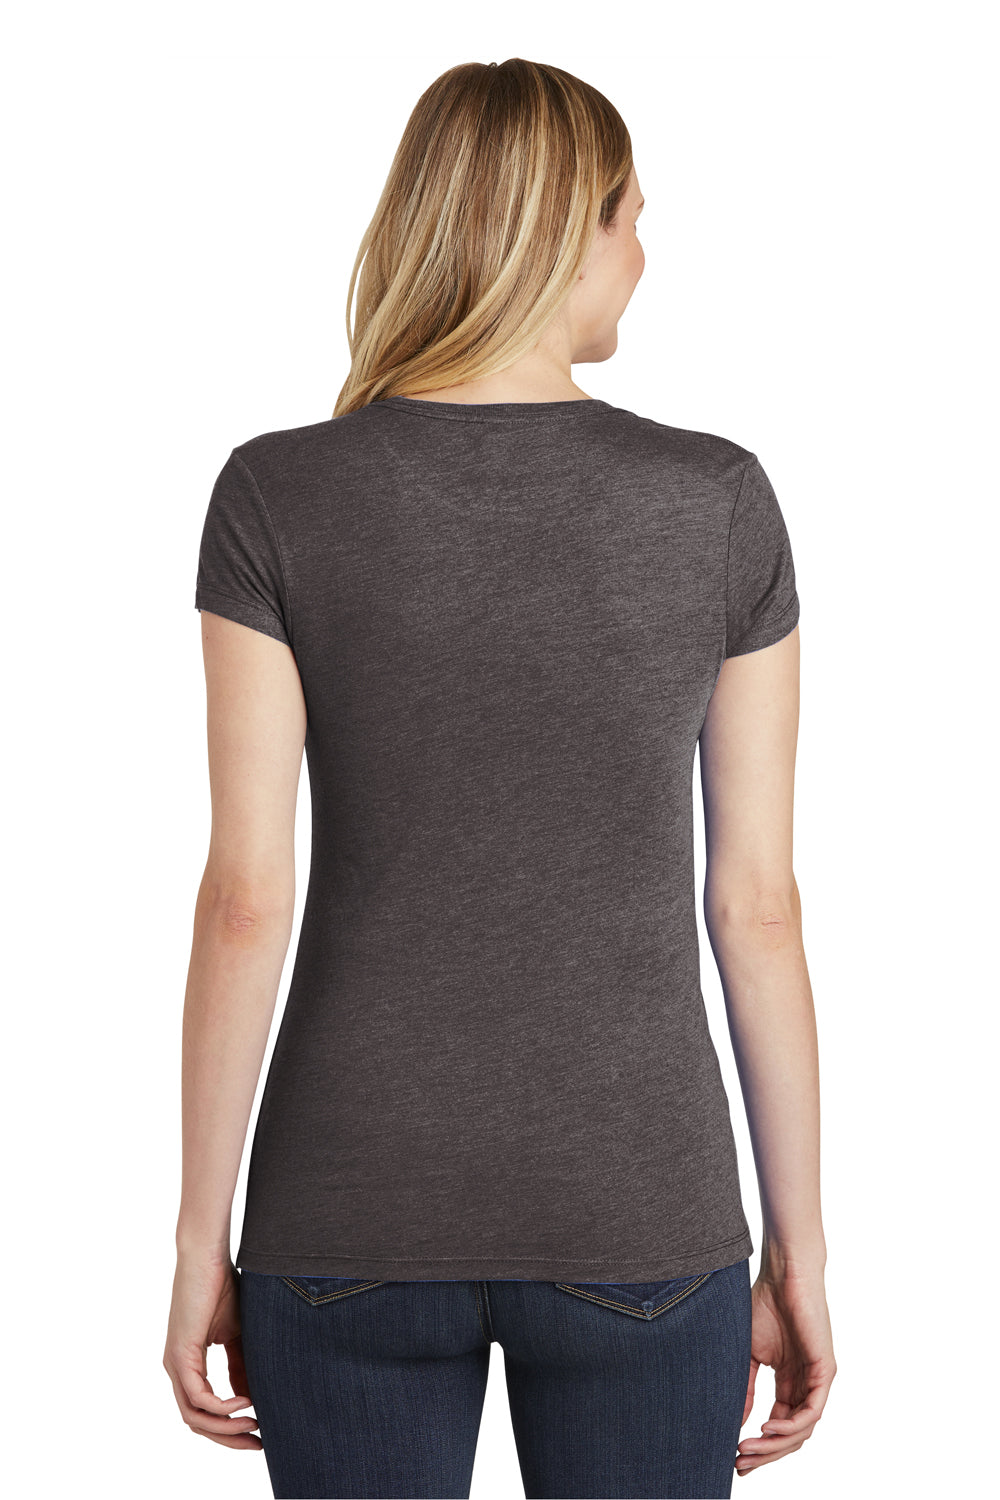 District DT155 Womens Fitted Perfect Tri Short Sleeve Crewneck T-Shirt Charcoal Grey Back